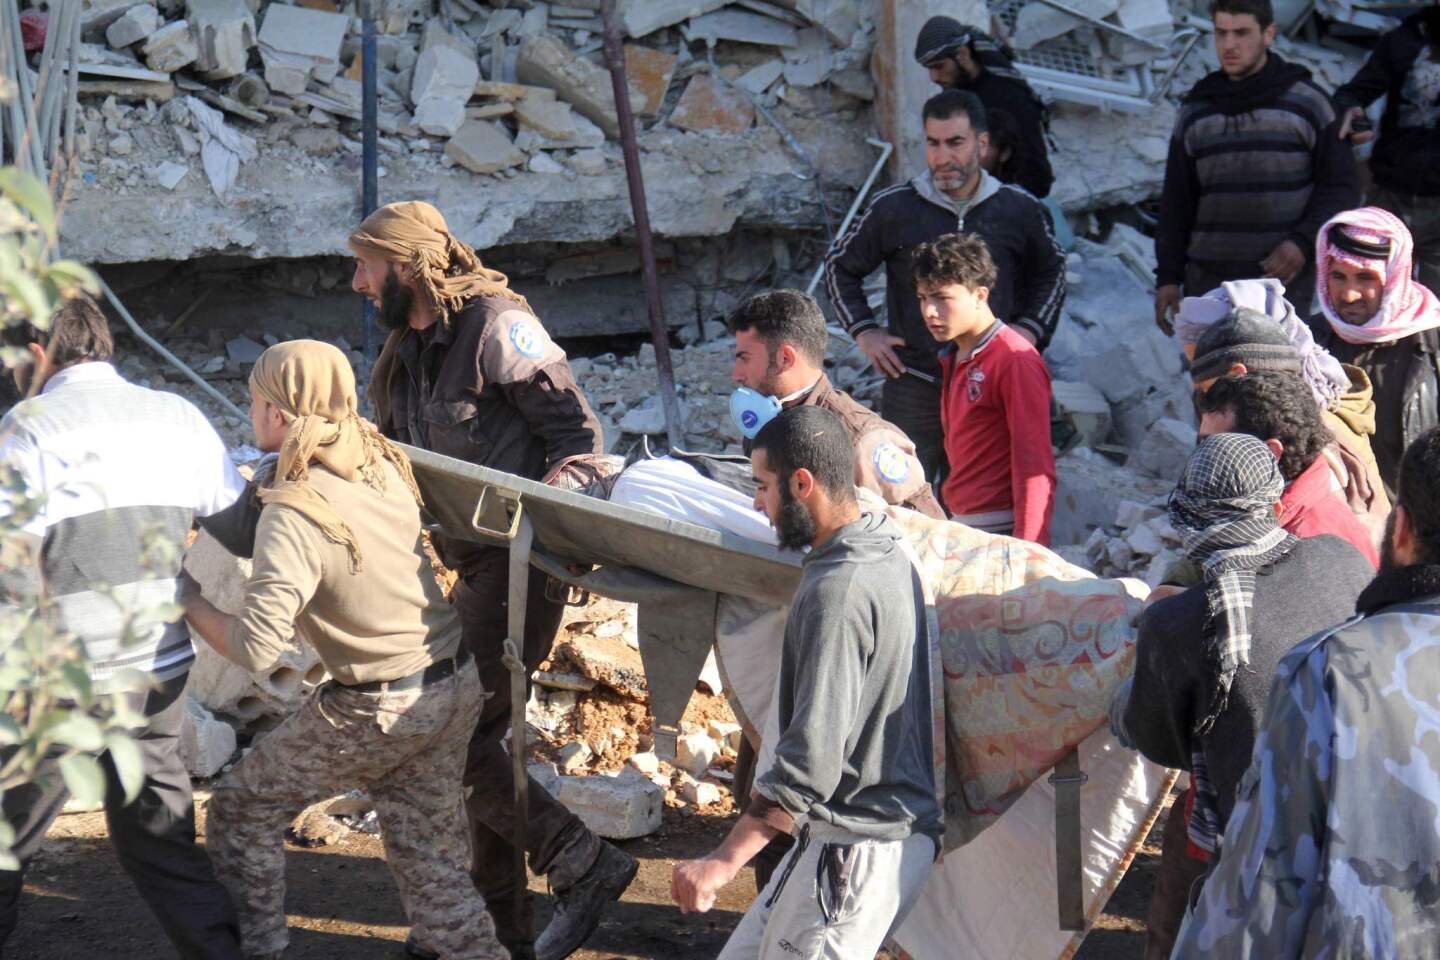 Doctors Without Borders hospital bombed